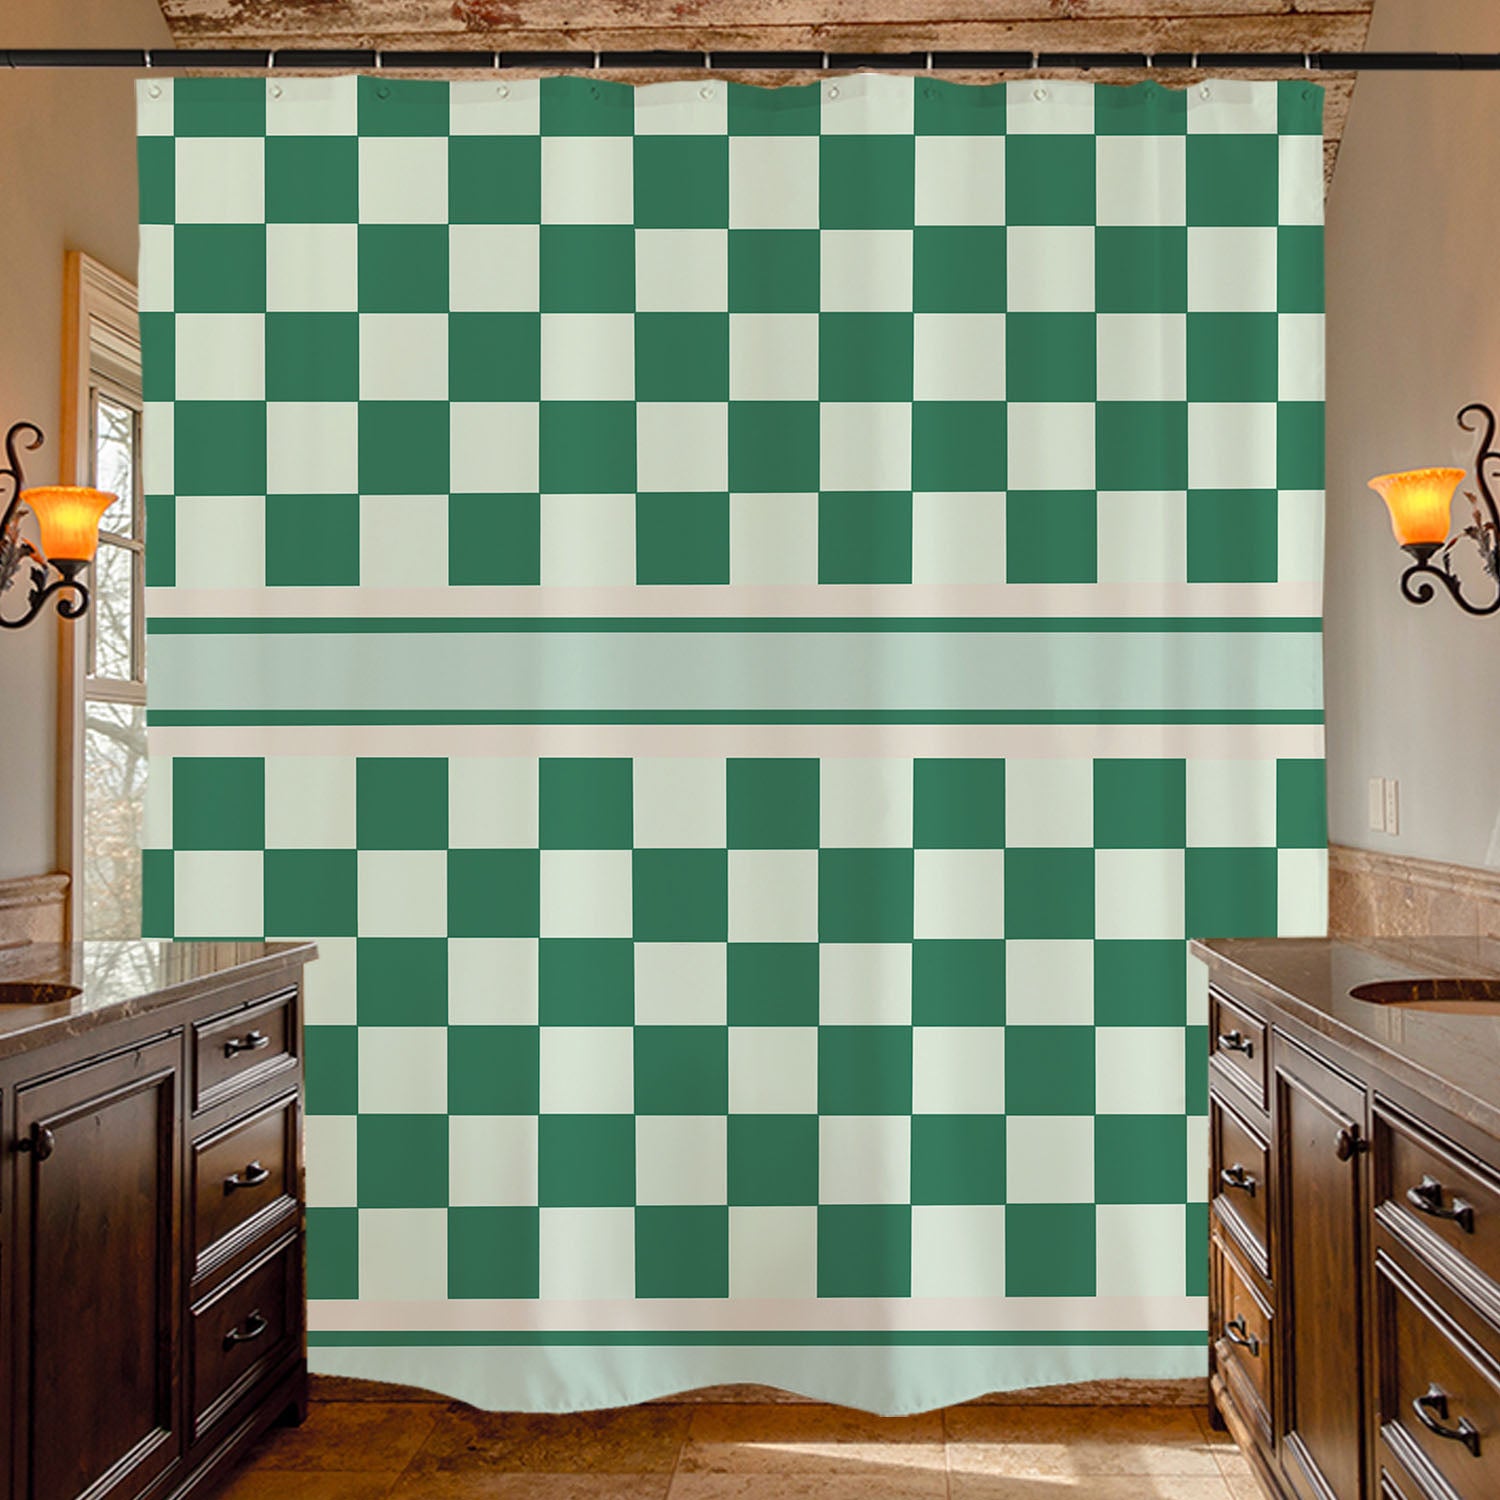 Feblilac Green Checkerboard Pattern Shower Curtain with Hooks